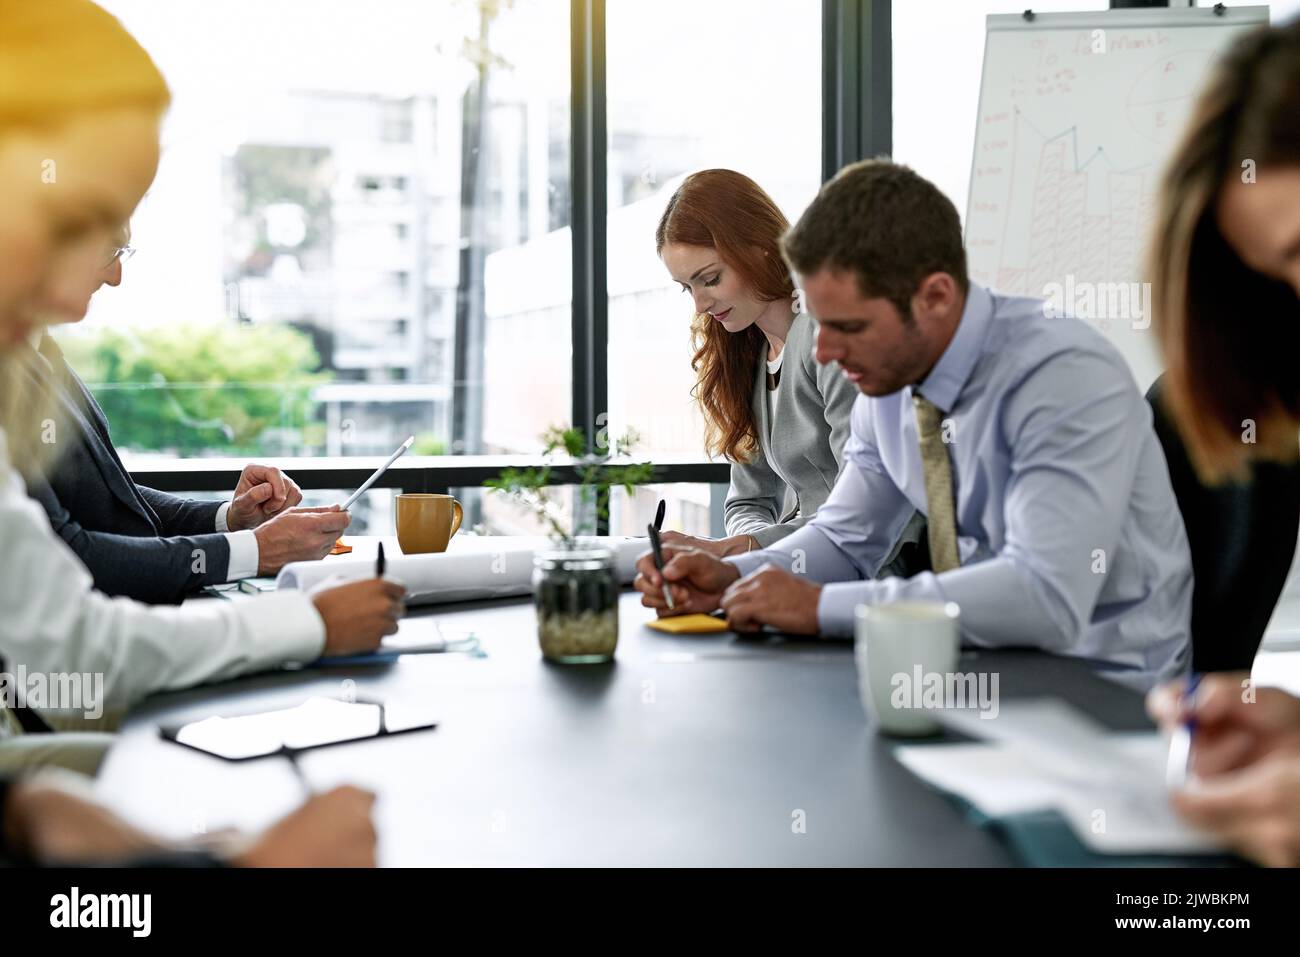 Theyve come to their meeting well prepared. a team of executives having a formal meeting in a boardroom. Stock Photo